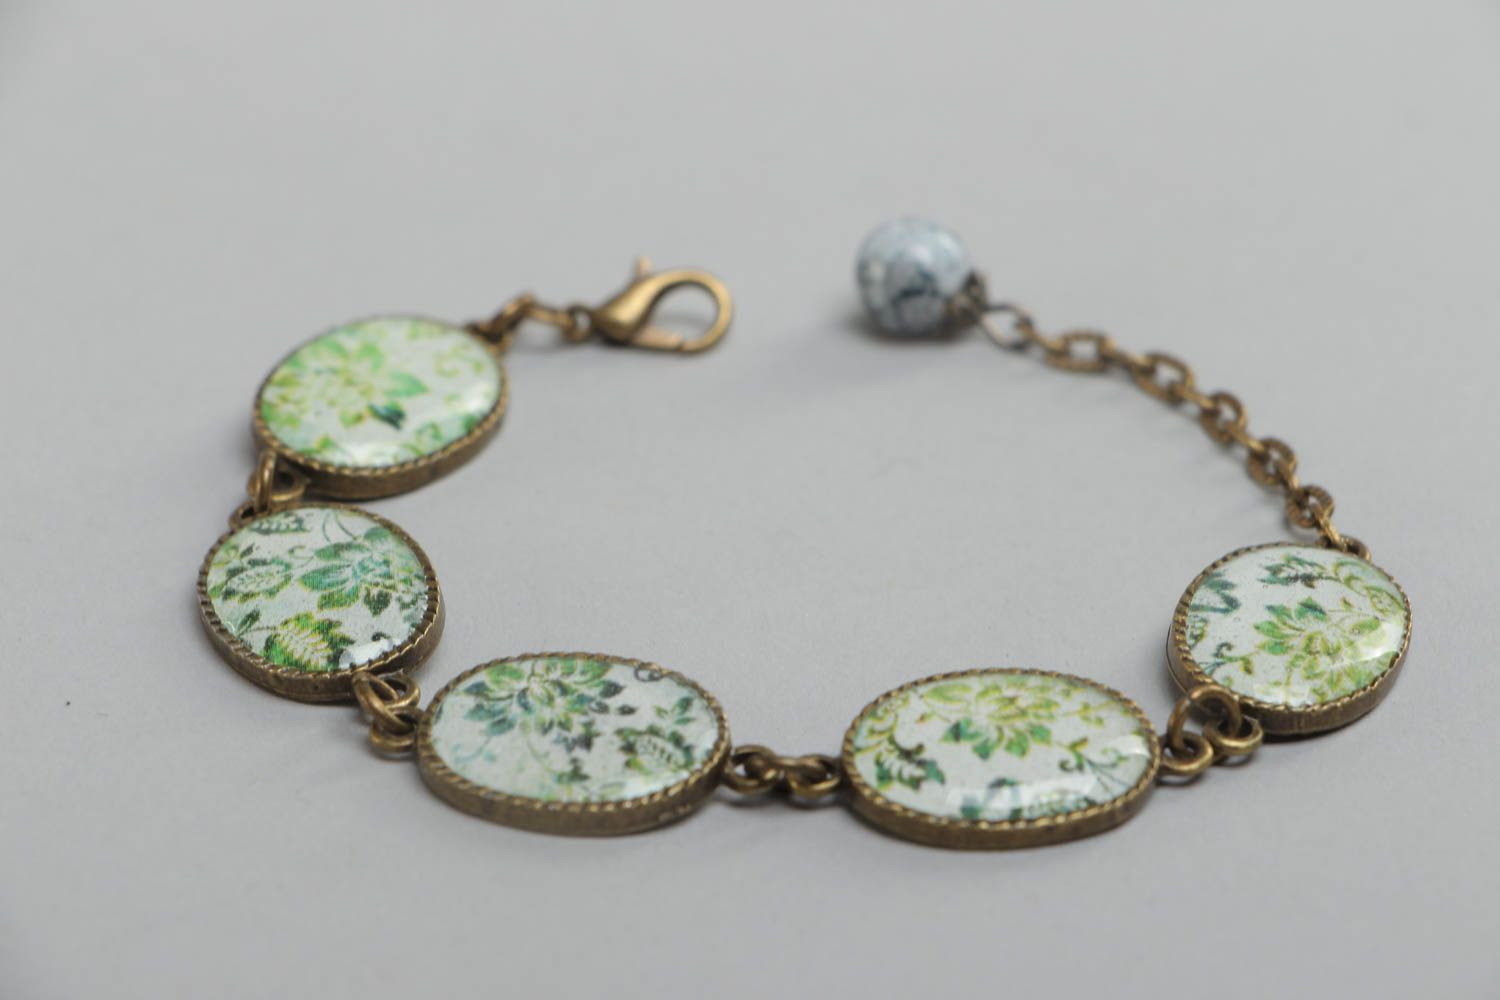 Handmade vintage bracelet made of glass glaze with metal fittings and pendants with green flowers photo 3